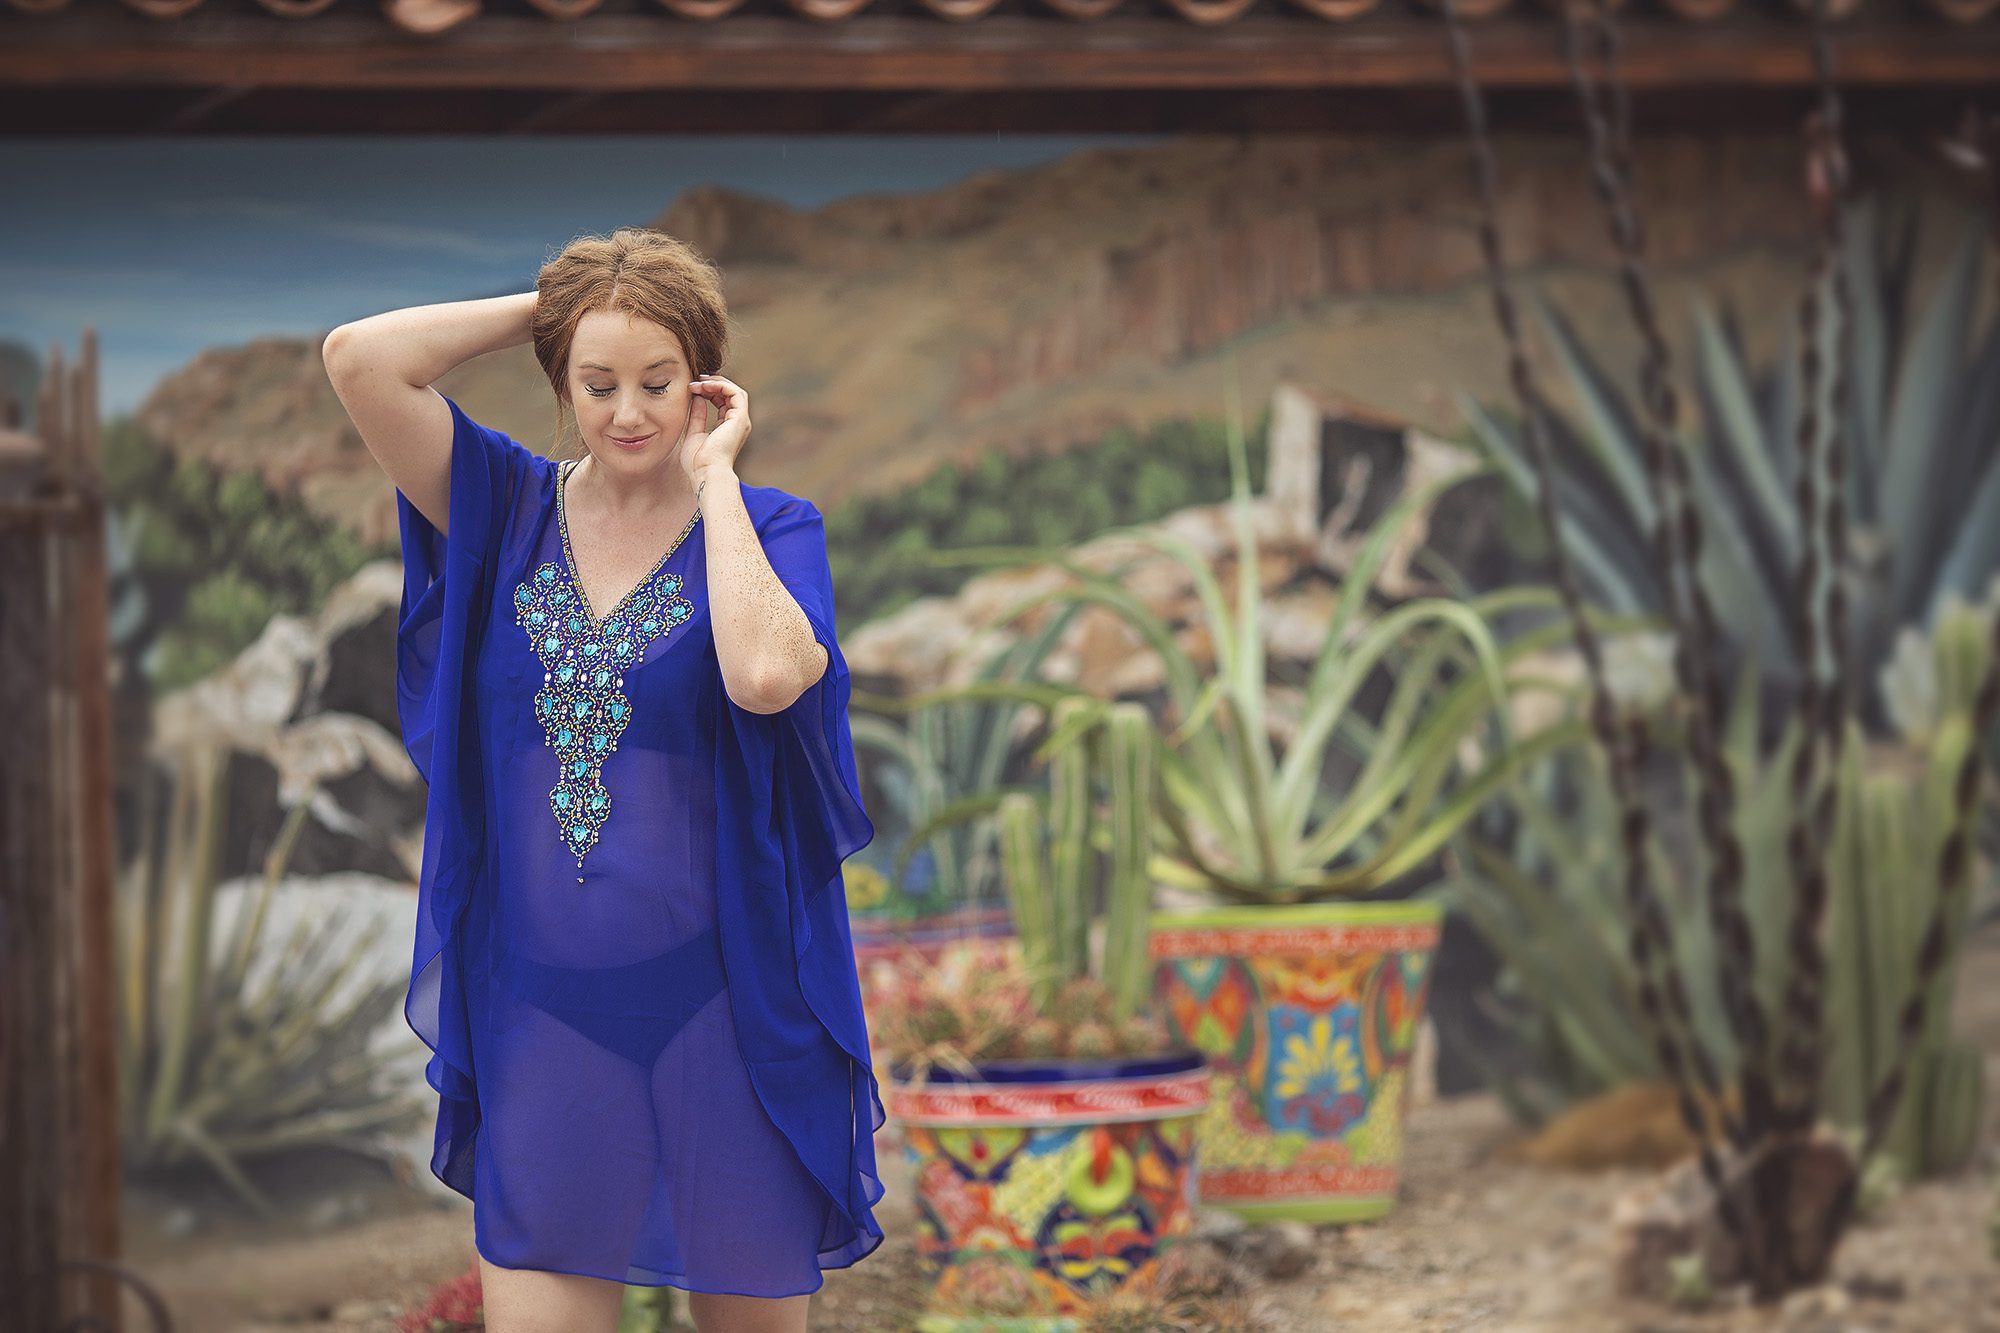 Mandy wearing an electric blue swim cover-up in front of a desert mural with adorning color plant pots by the pool at Hacienda Del Sol in Tucson